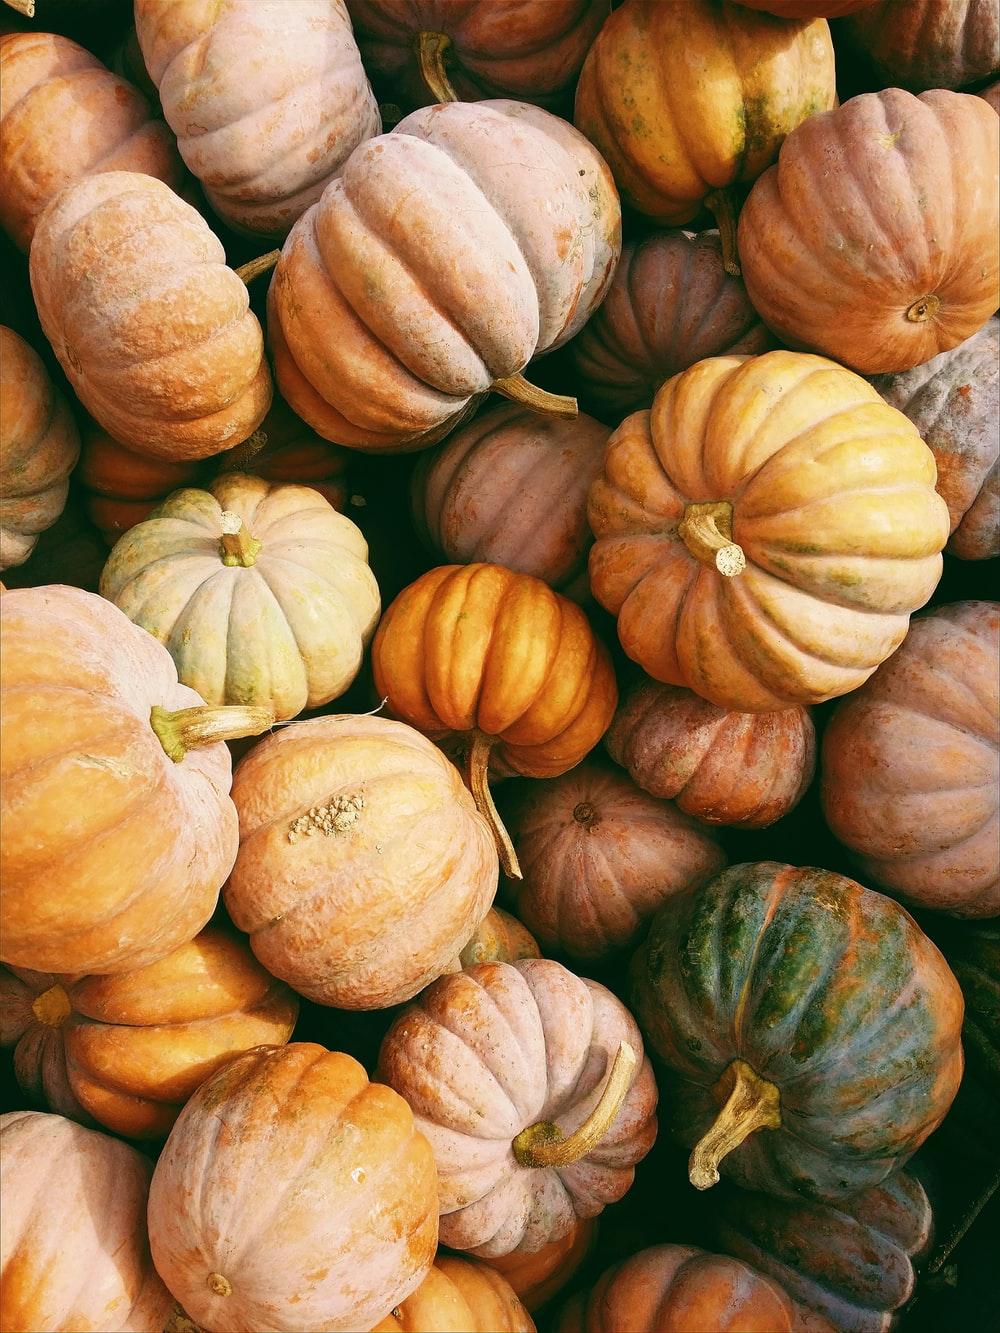 Pumpkin Picture [HD]. Download Free Image